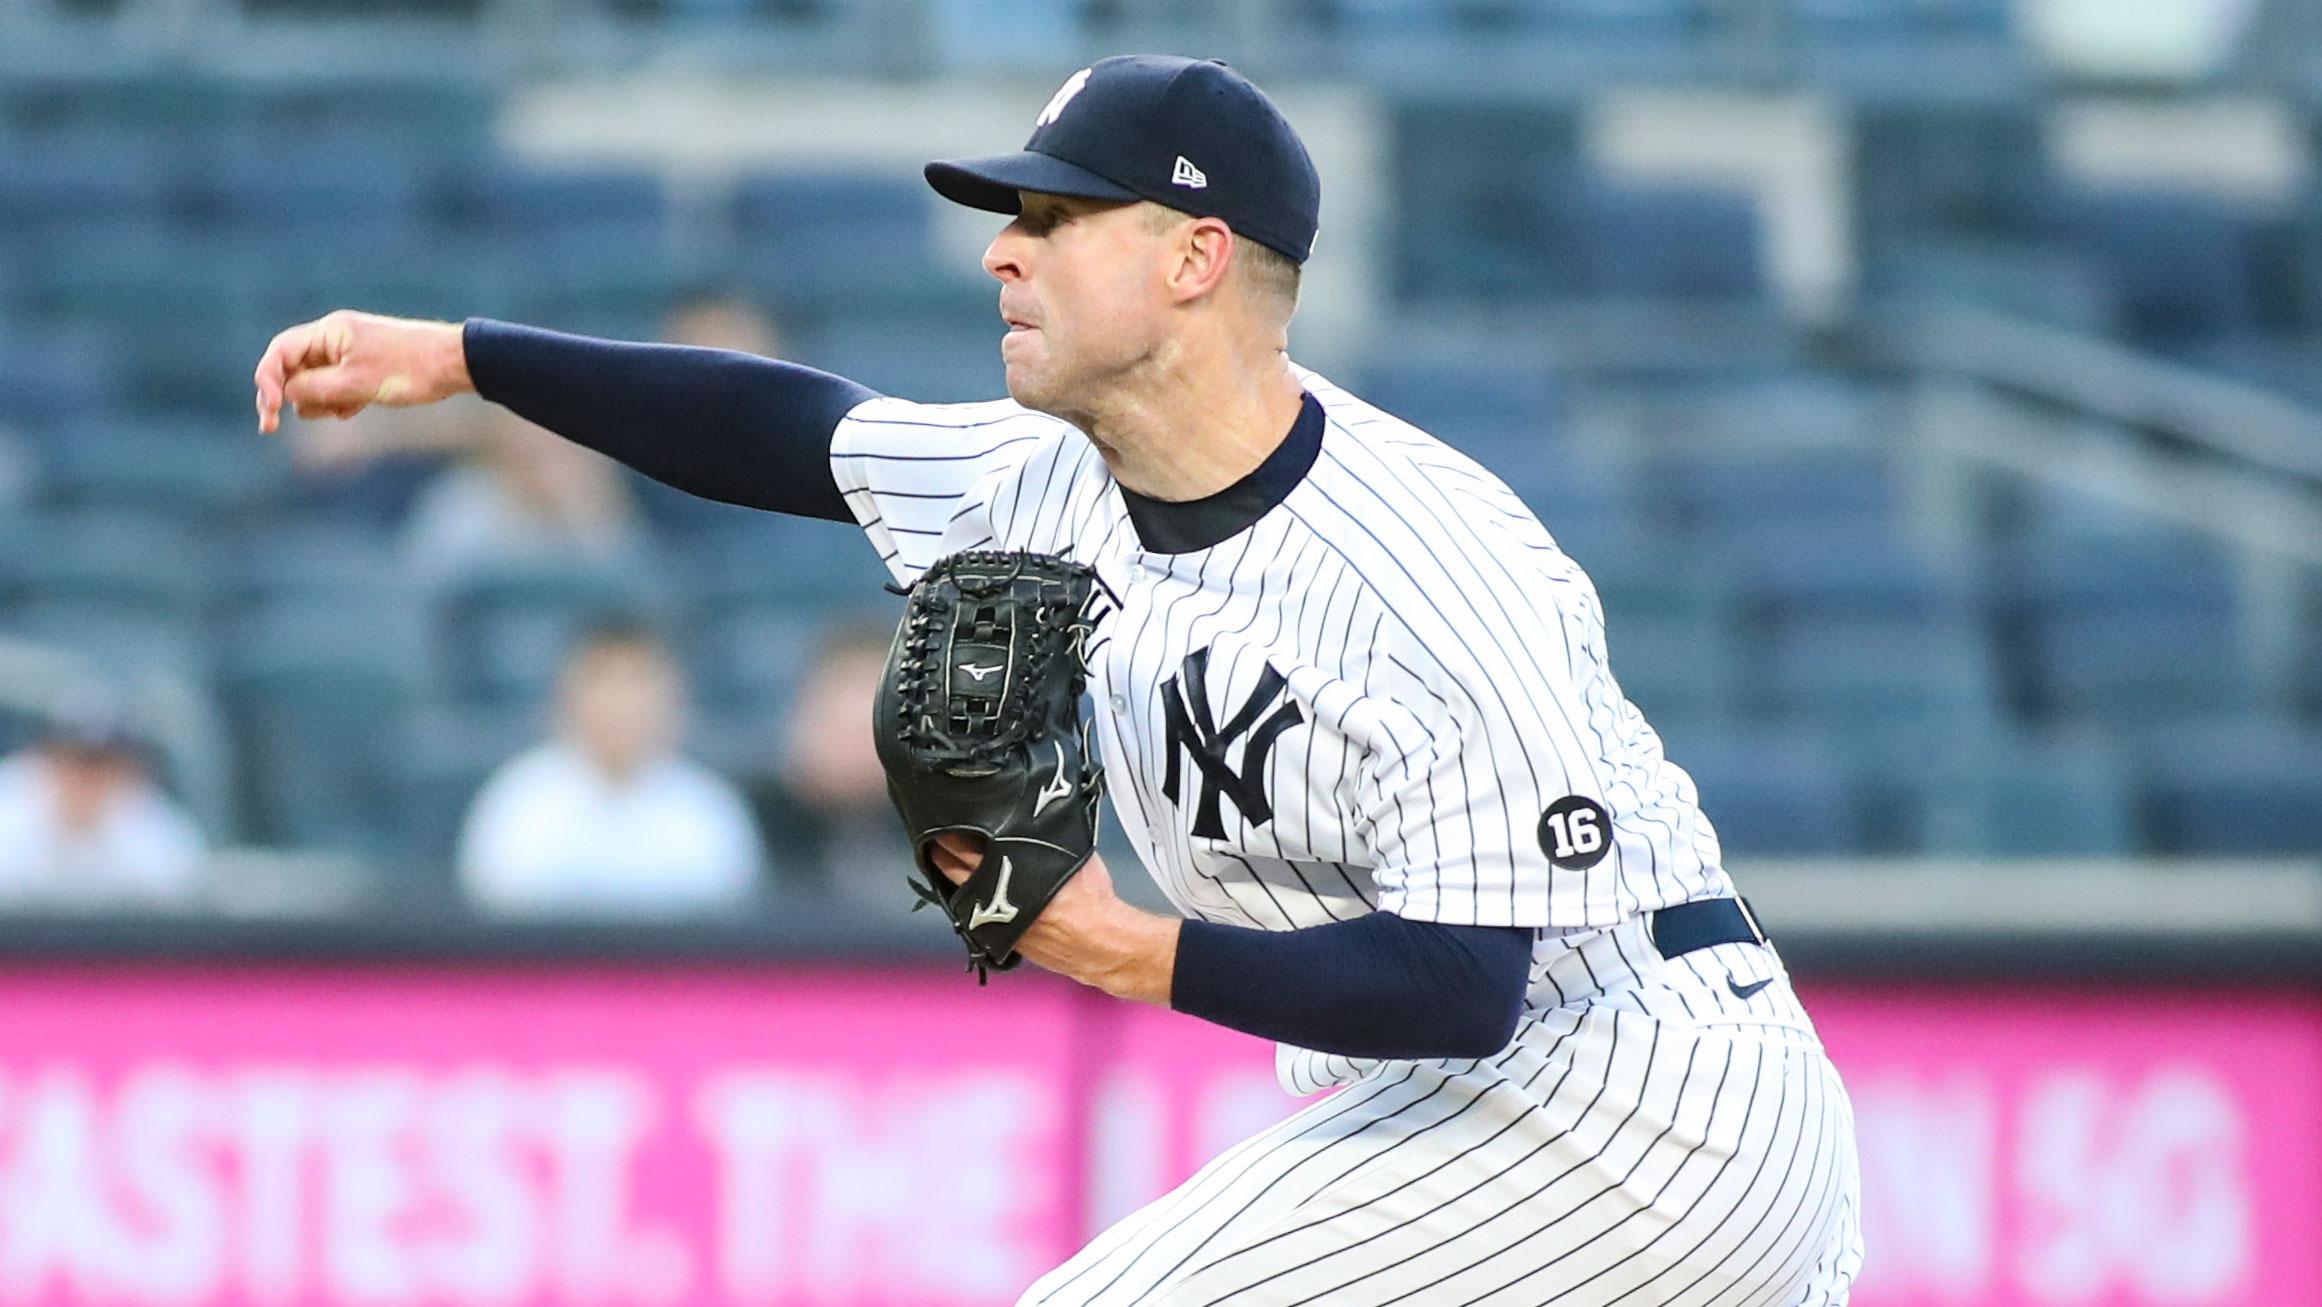 May 25, 2021; Bronx, New York, USA; New York Yankees pitcher Corey Kluber (28) pitches in the first inning against the Toronto Blue Jays at Yankee Stadium. / Wendell Cruz-USA TODAY Sports